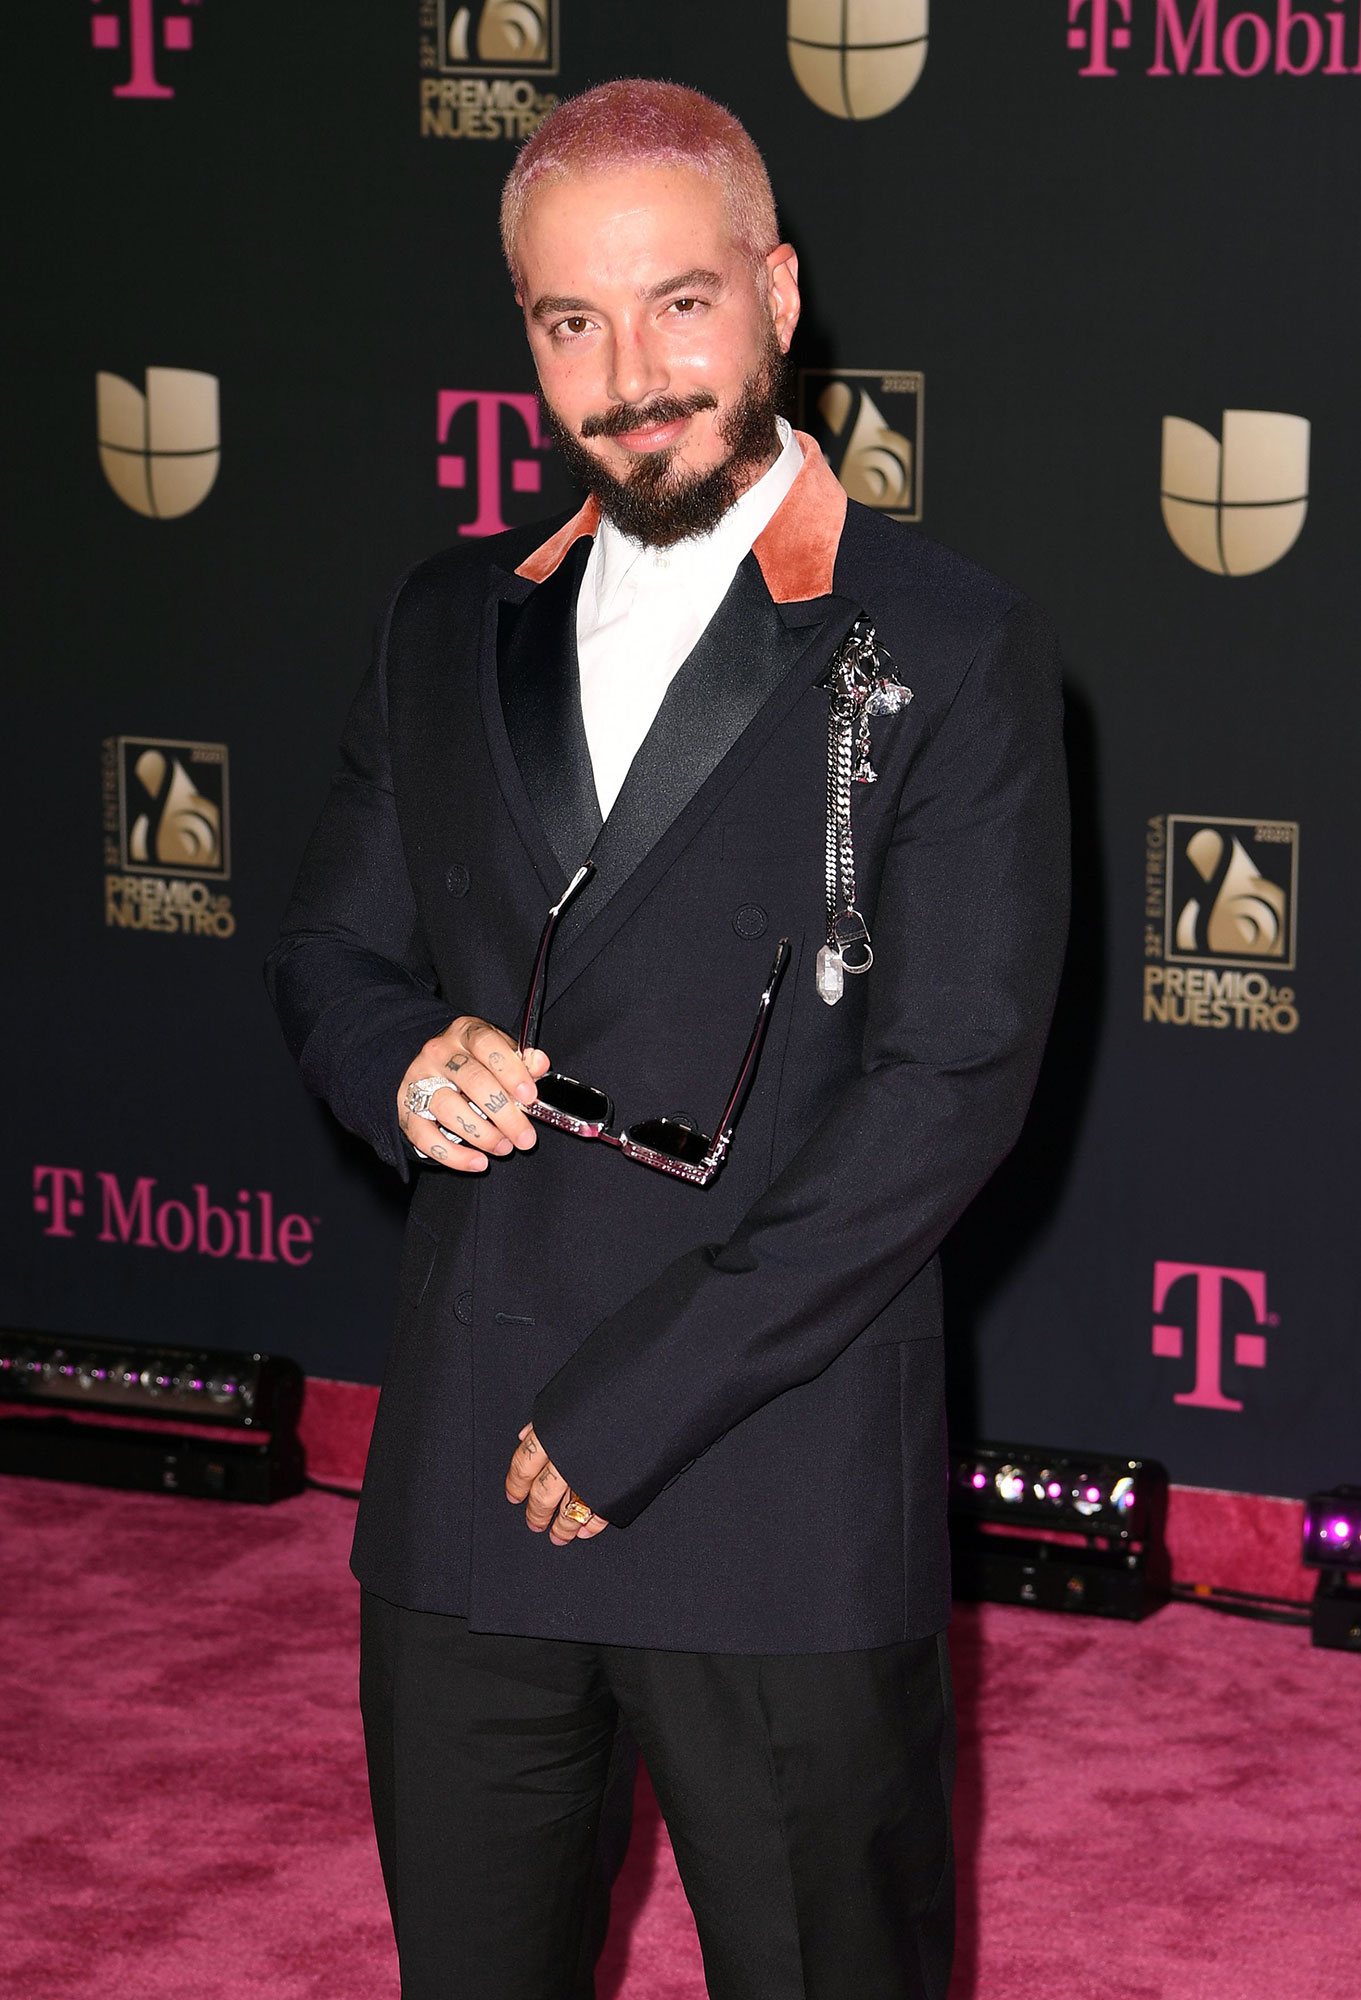 J Balvin at 2021 CFDA FASHION AWARDS: DINNER / id : 4529824 by Yvonne  Tnt/